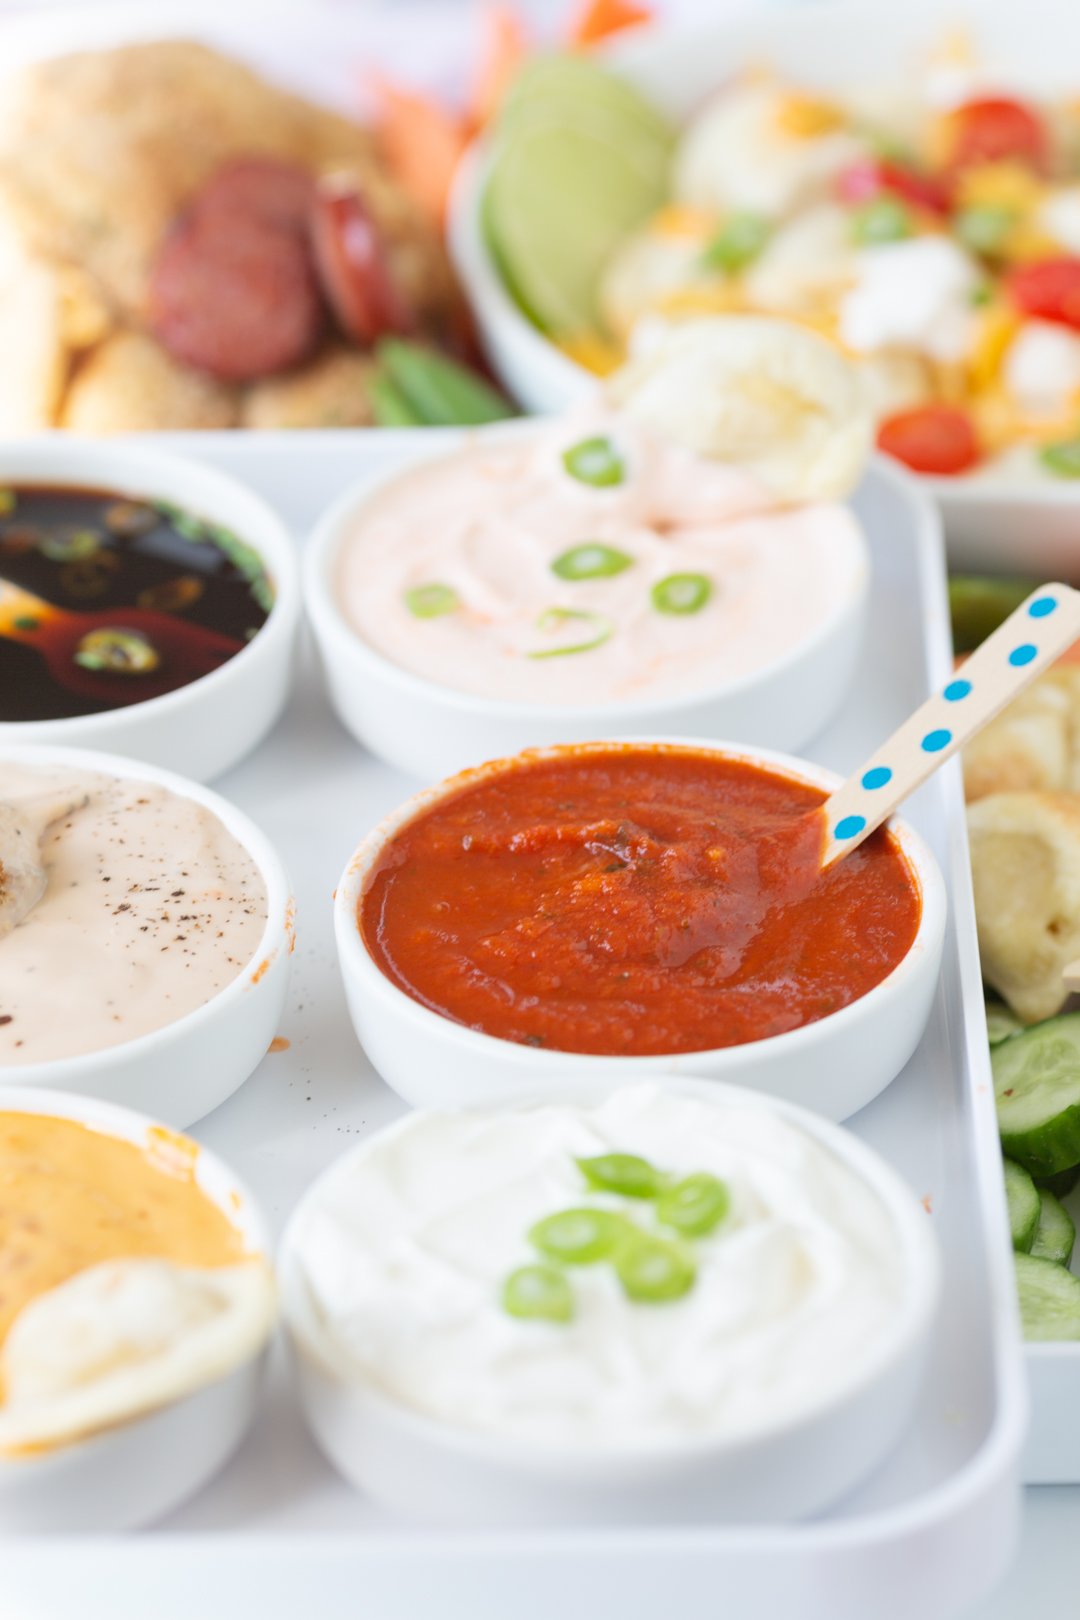 up close view of mini bowls filled with a variety of sauces